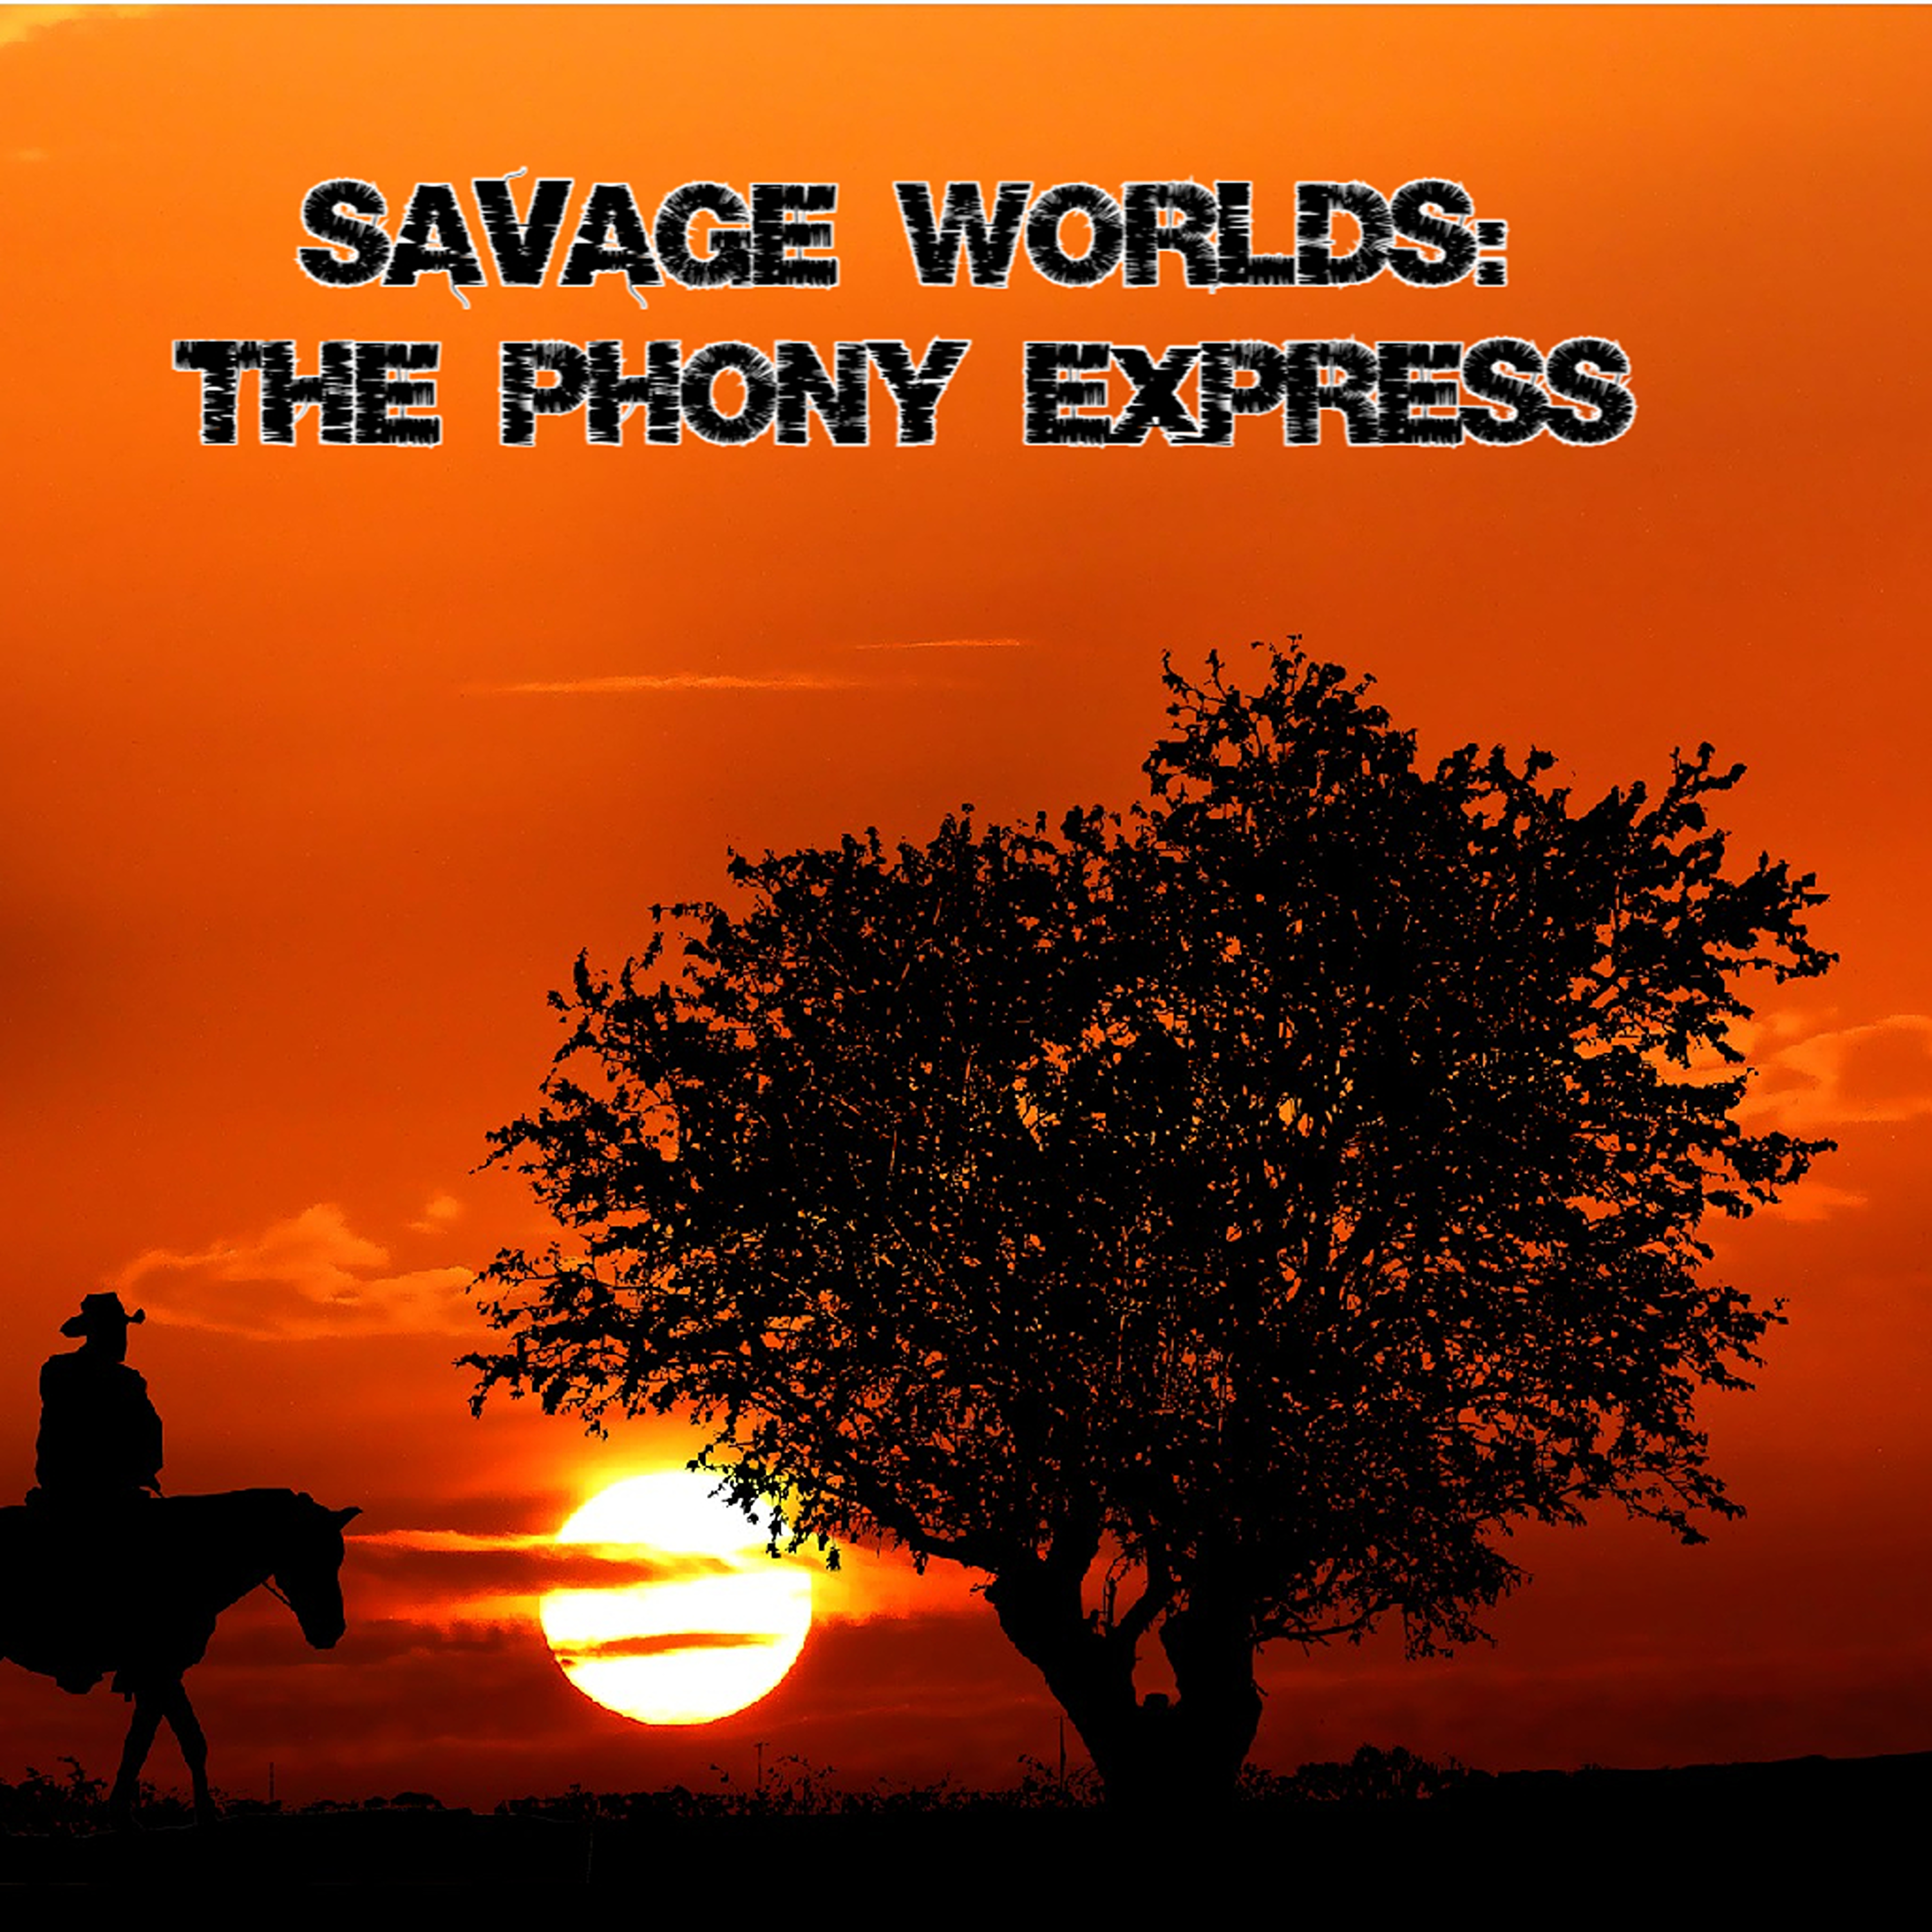 Savage Worlds - The Phony Express 2.9: Rynnie Does A Bad Bad Thing